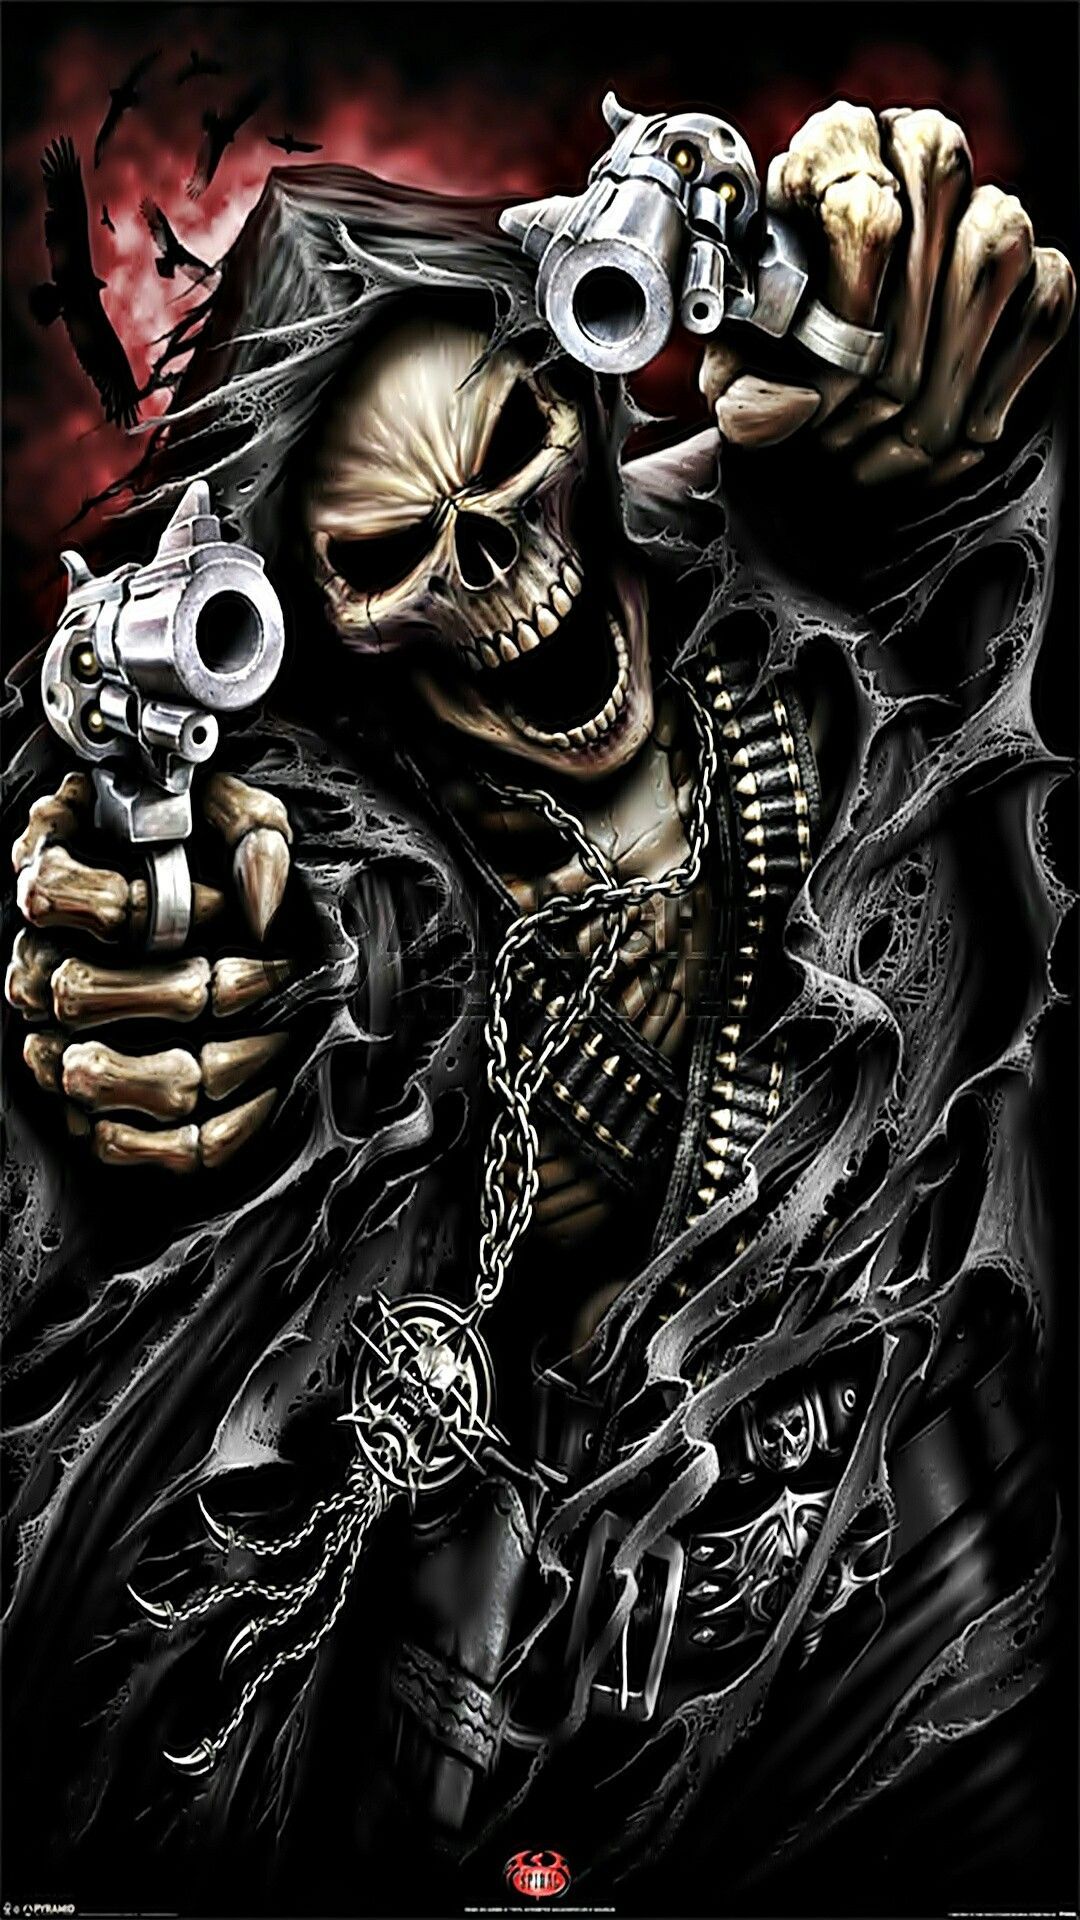 *Skeleton, Clowns, Guns, Animals and Scary Wallpaper ideas. scary wallpaper, skull wallpaper, skull art